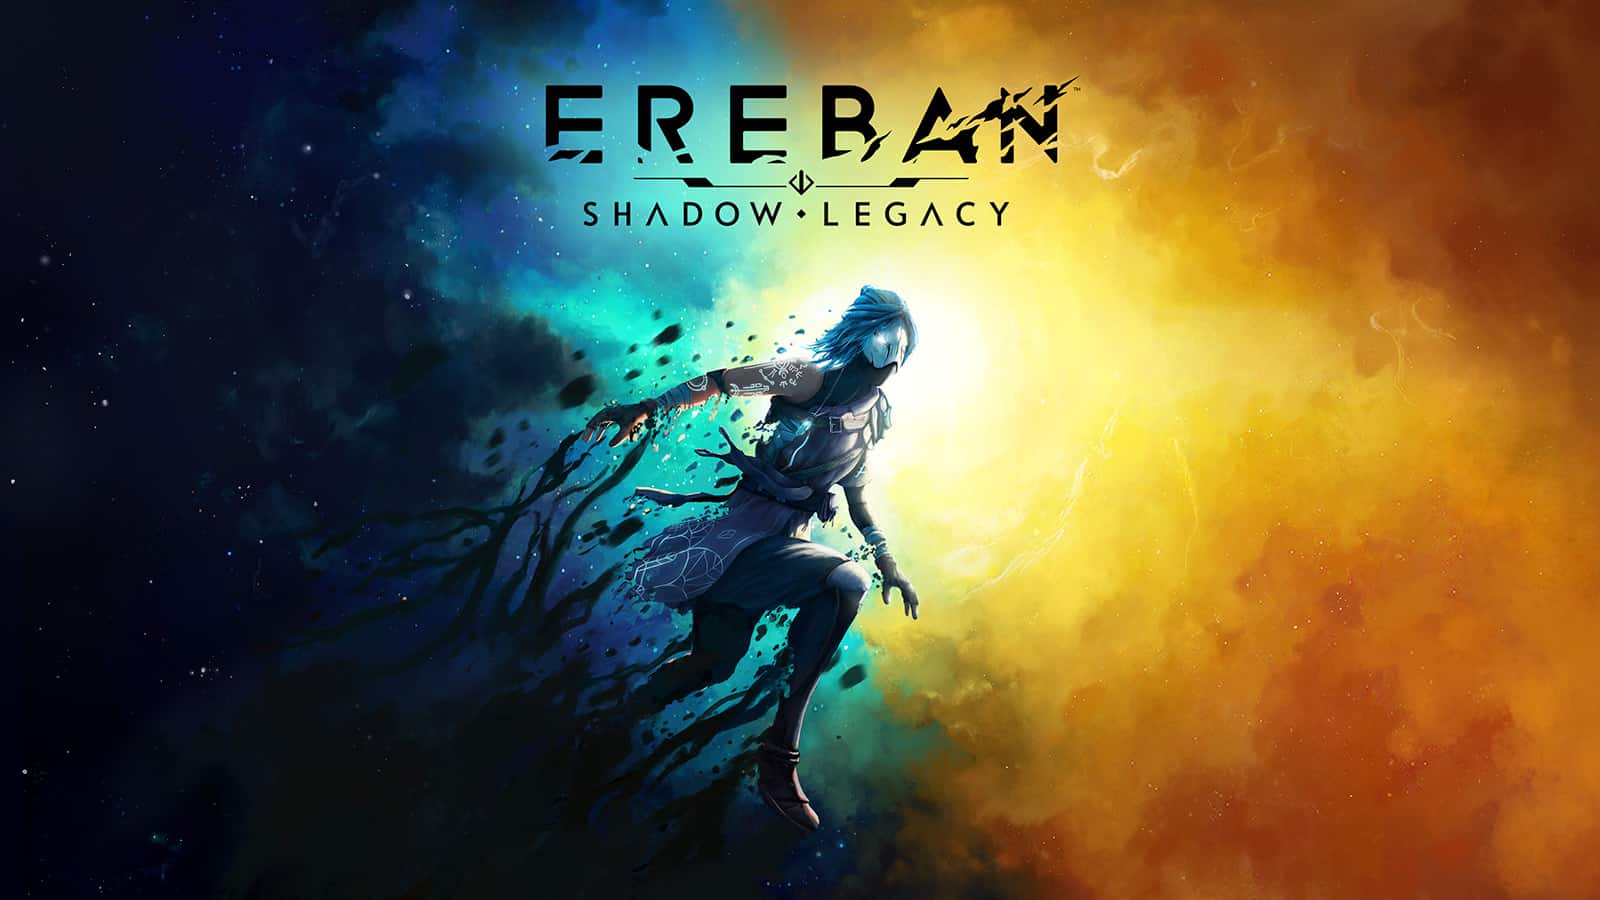 Fast-Paced Stealth Platformer Ereban: Shadow Legacy Launches In April For PC